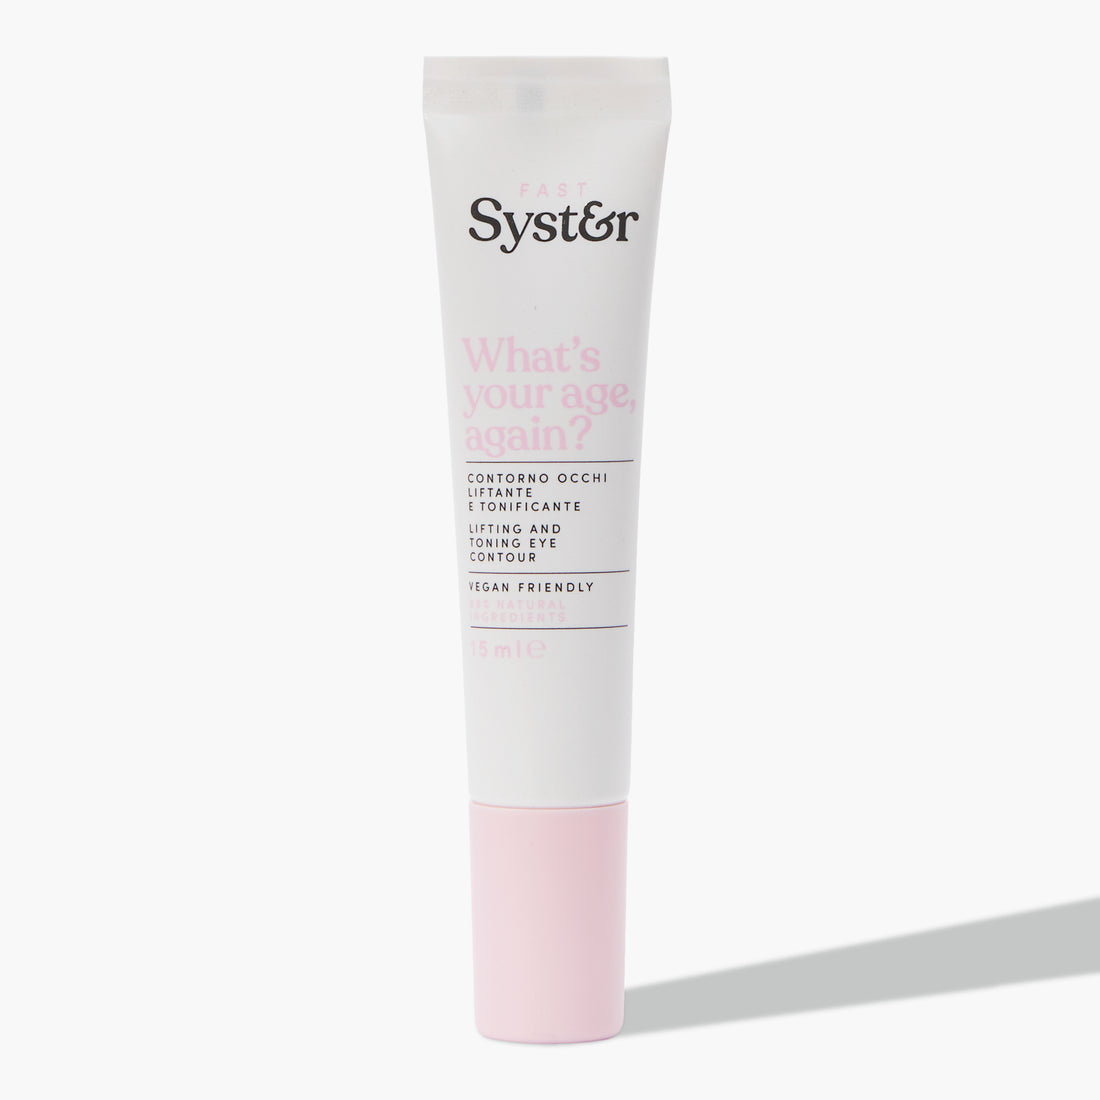 Lifting eye contour gel cream - What's your age again? | Syster